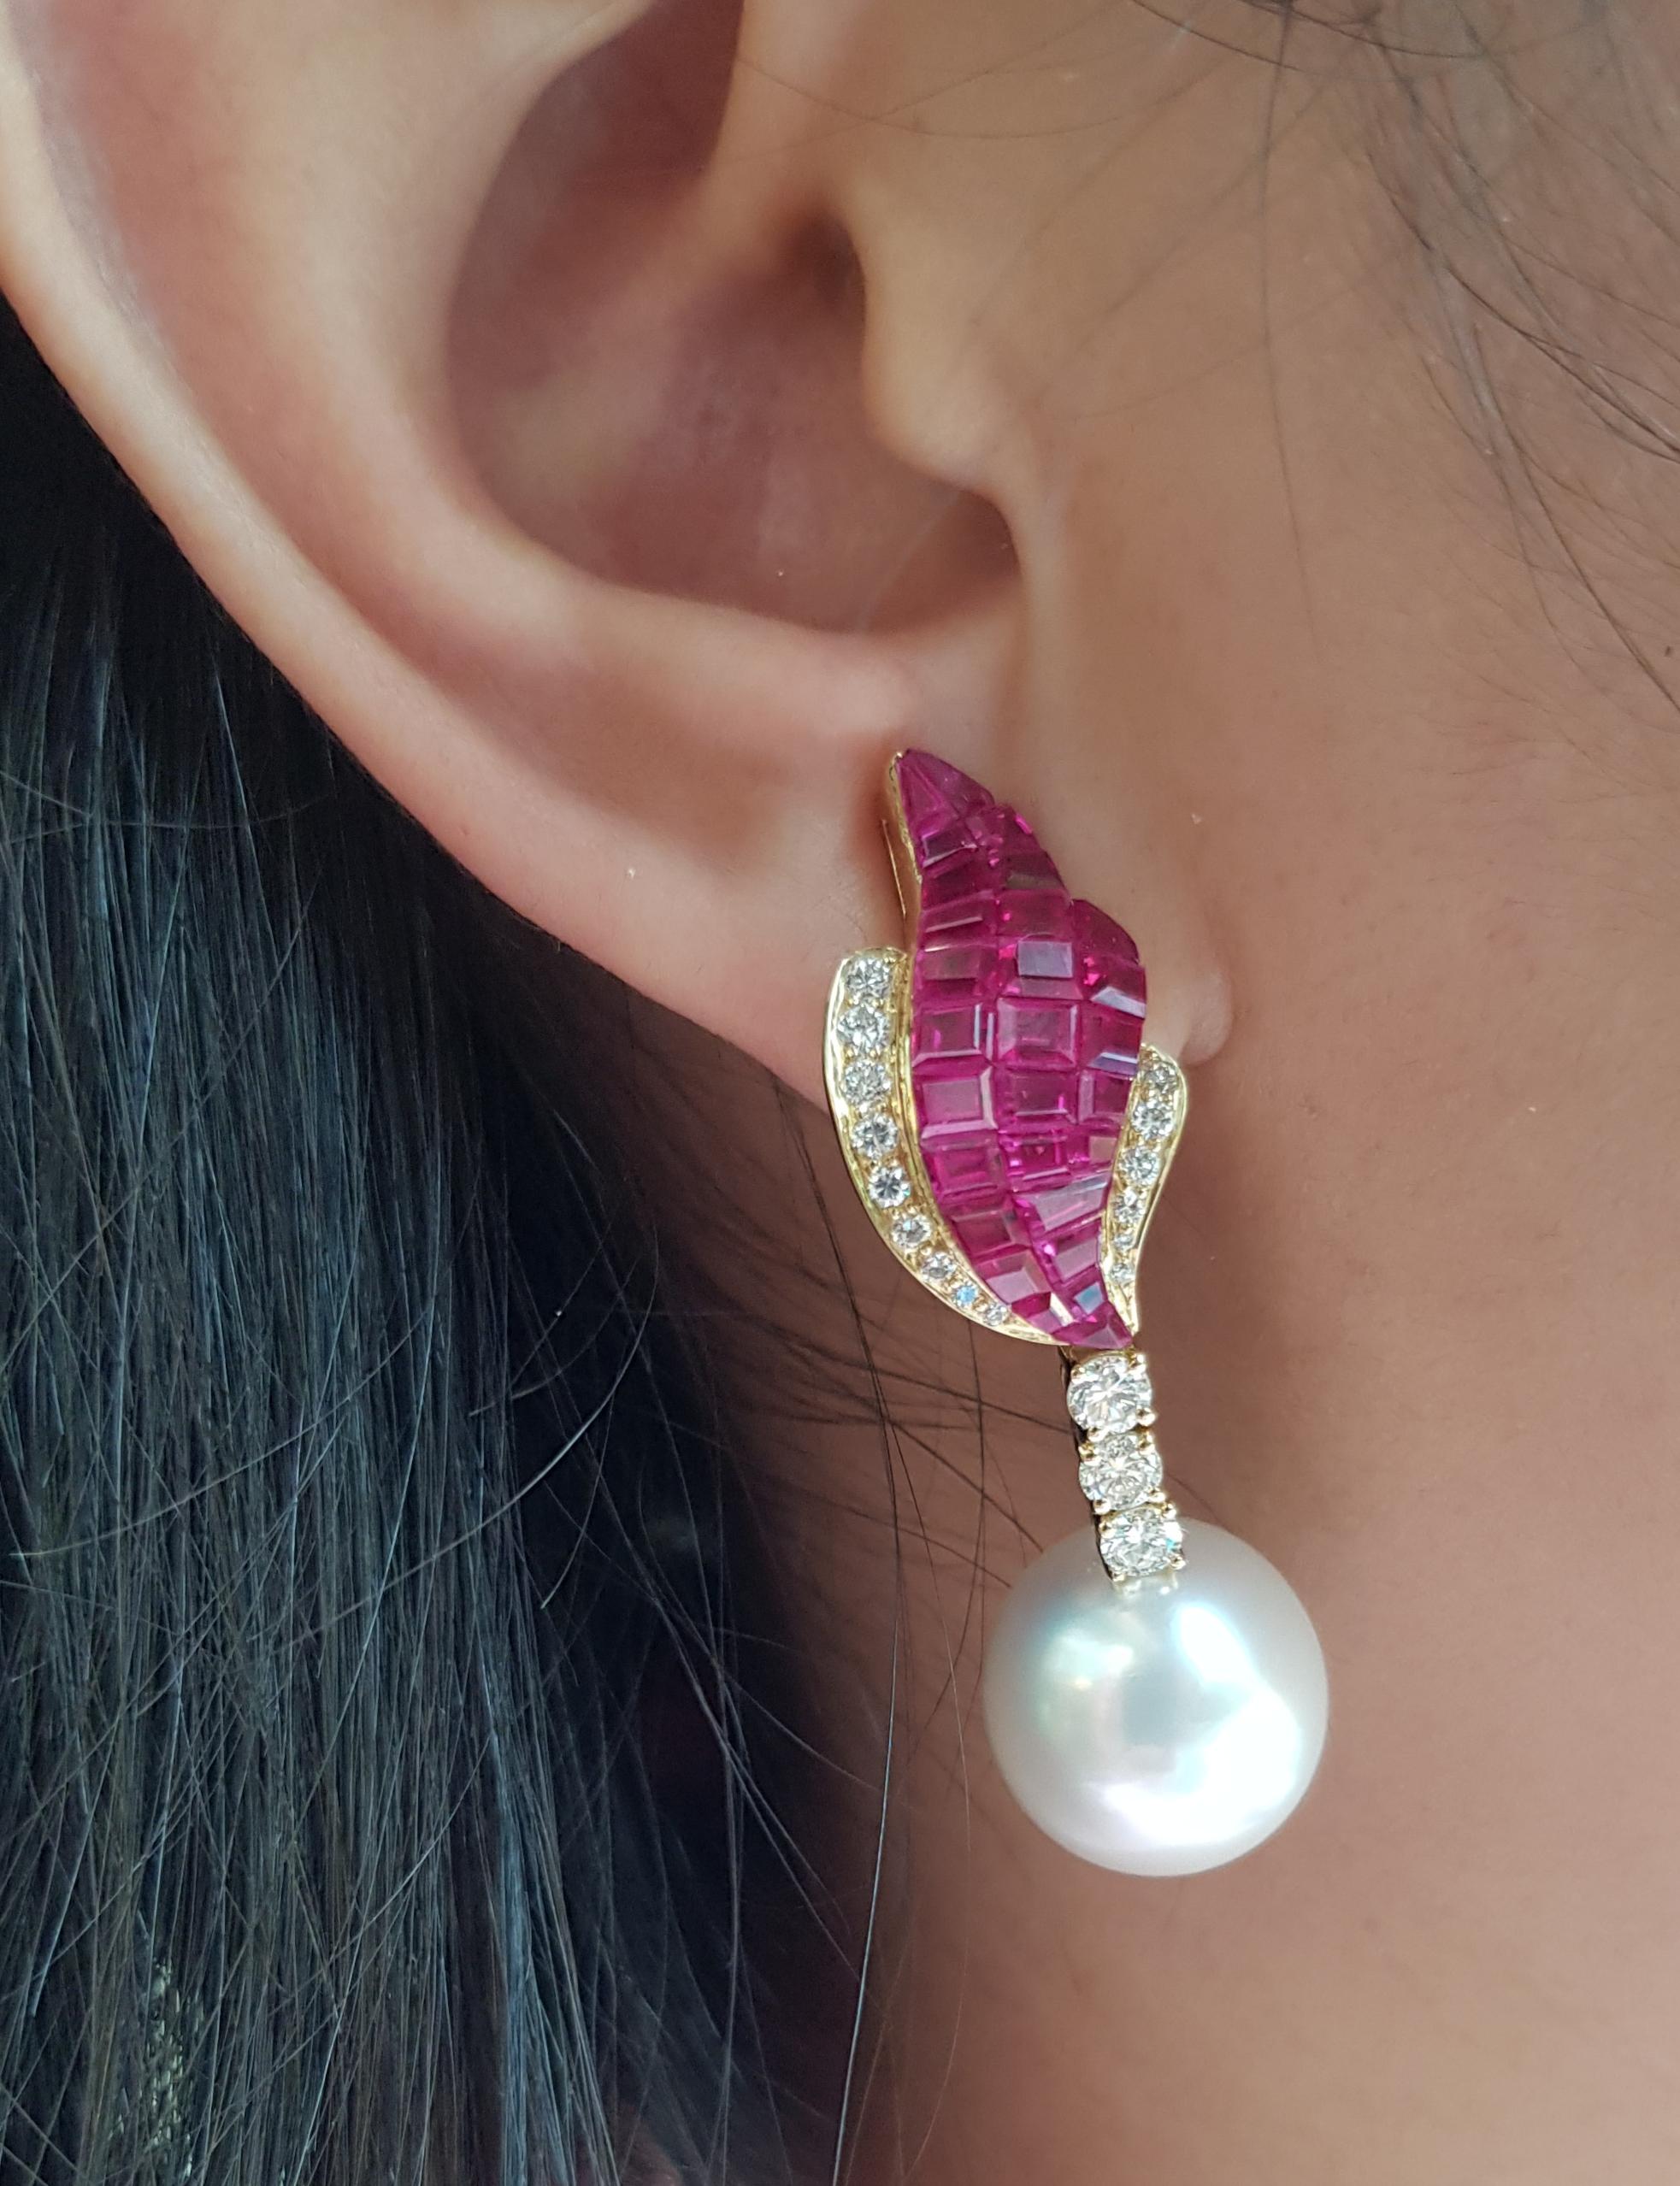 South Sea Pearl, Ruby 15.72 carats with Diamond 1.06 carats Earrings set in 18 Karat Gold Settings

Width:  1.3 cm 
Length: 4.5 cm
Total Weight: 22.05 grams

